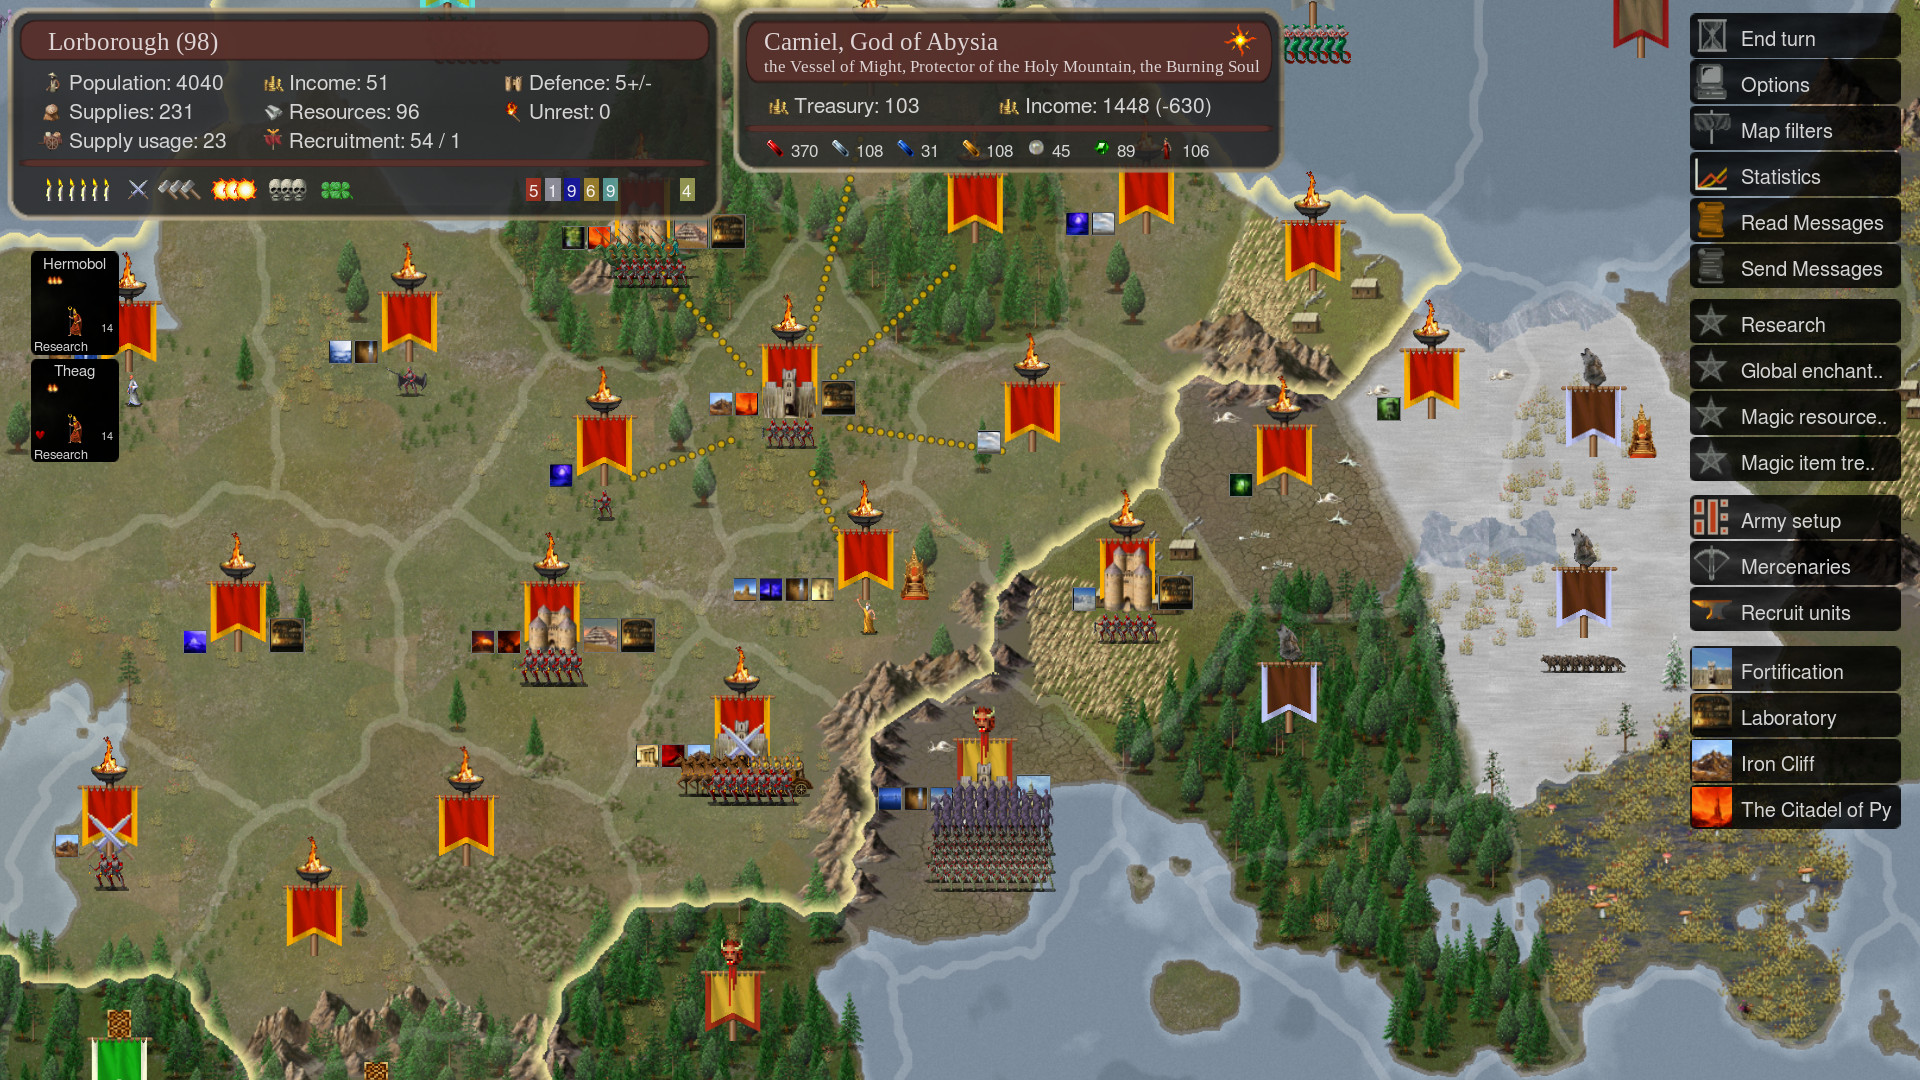 dominions 5 multiplayer